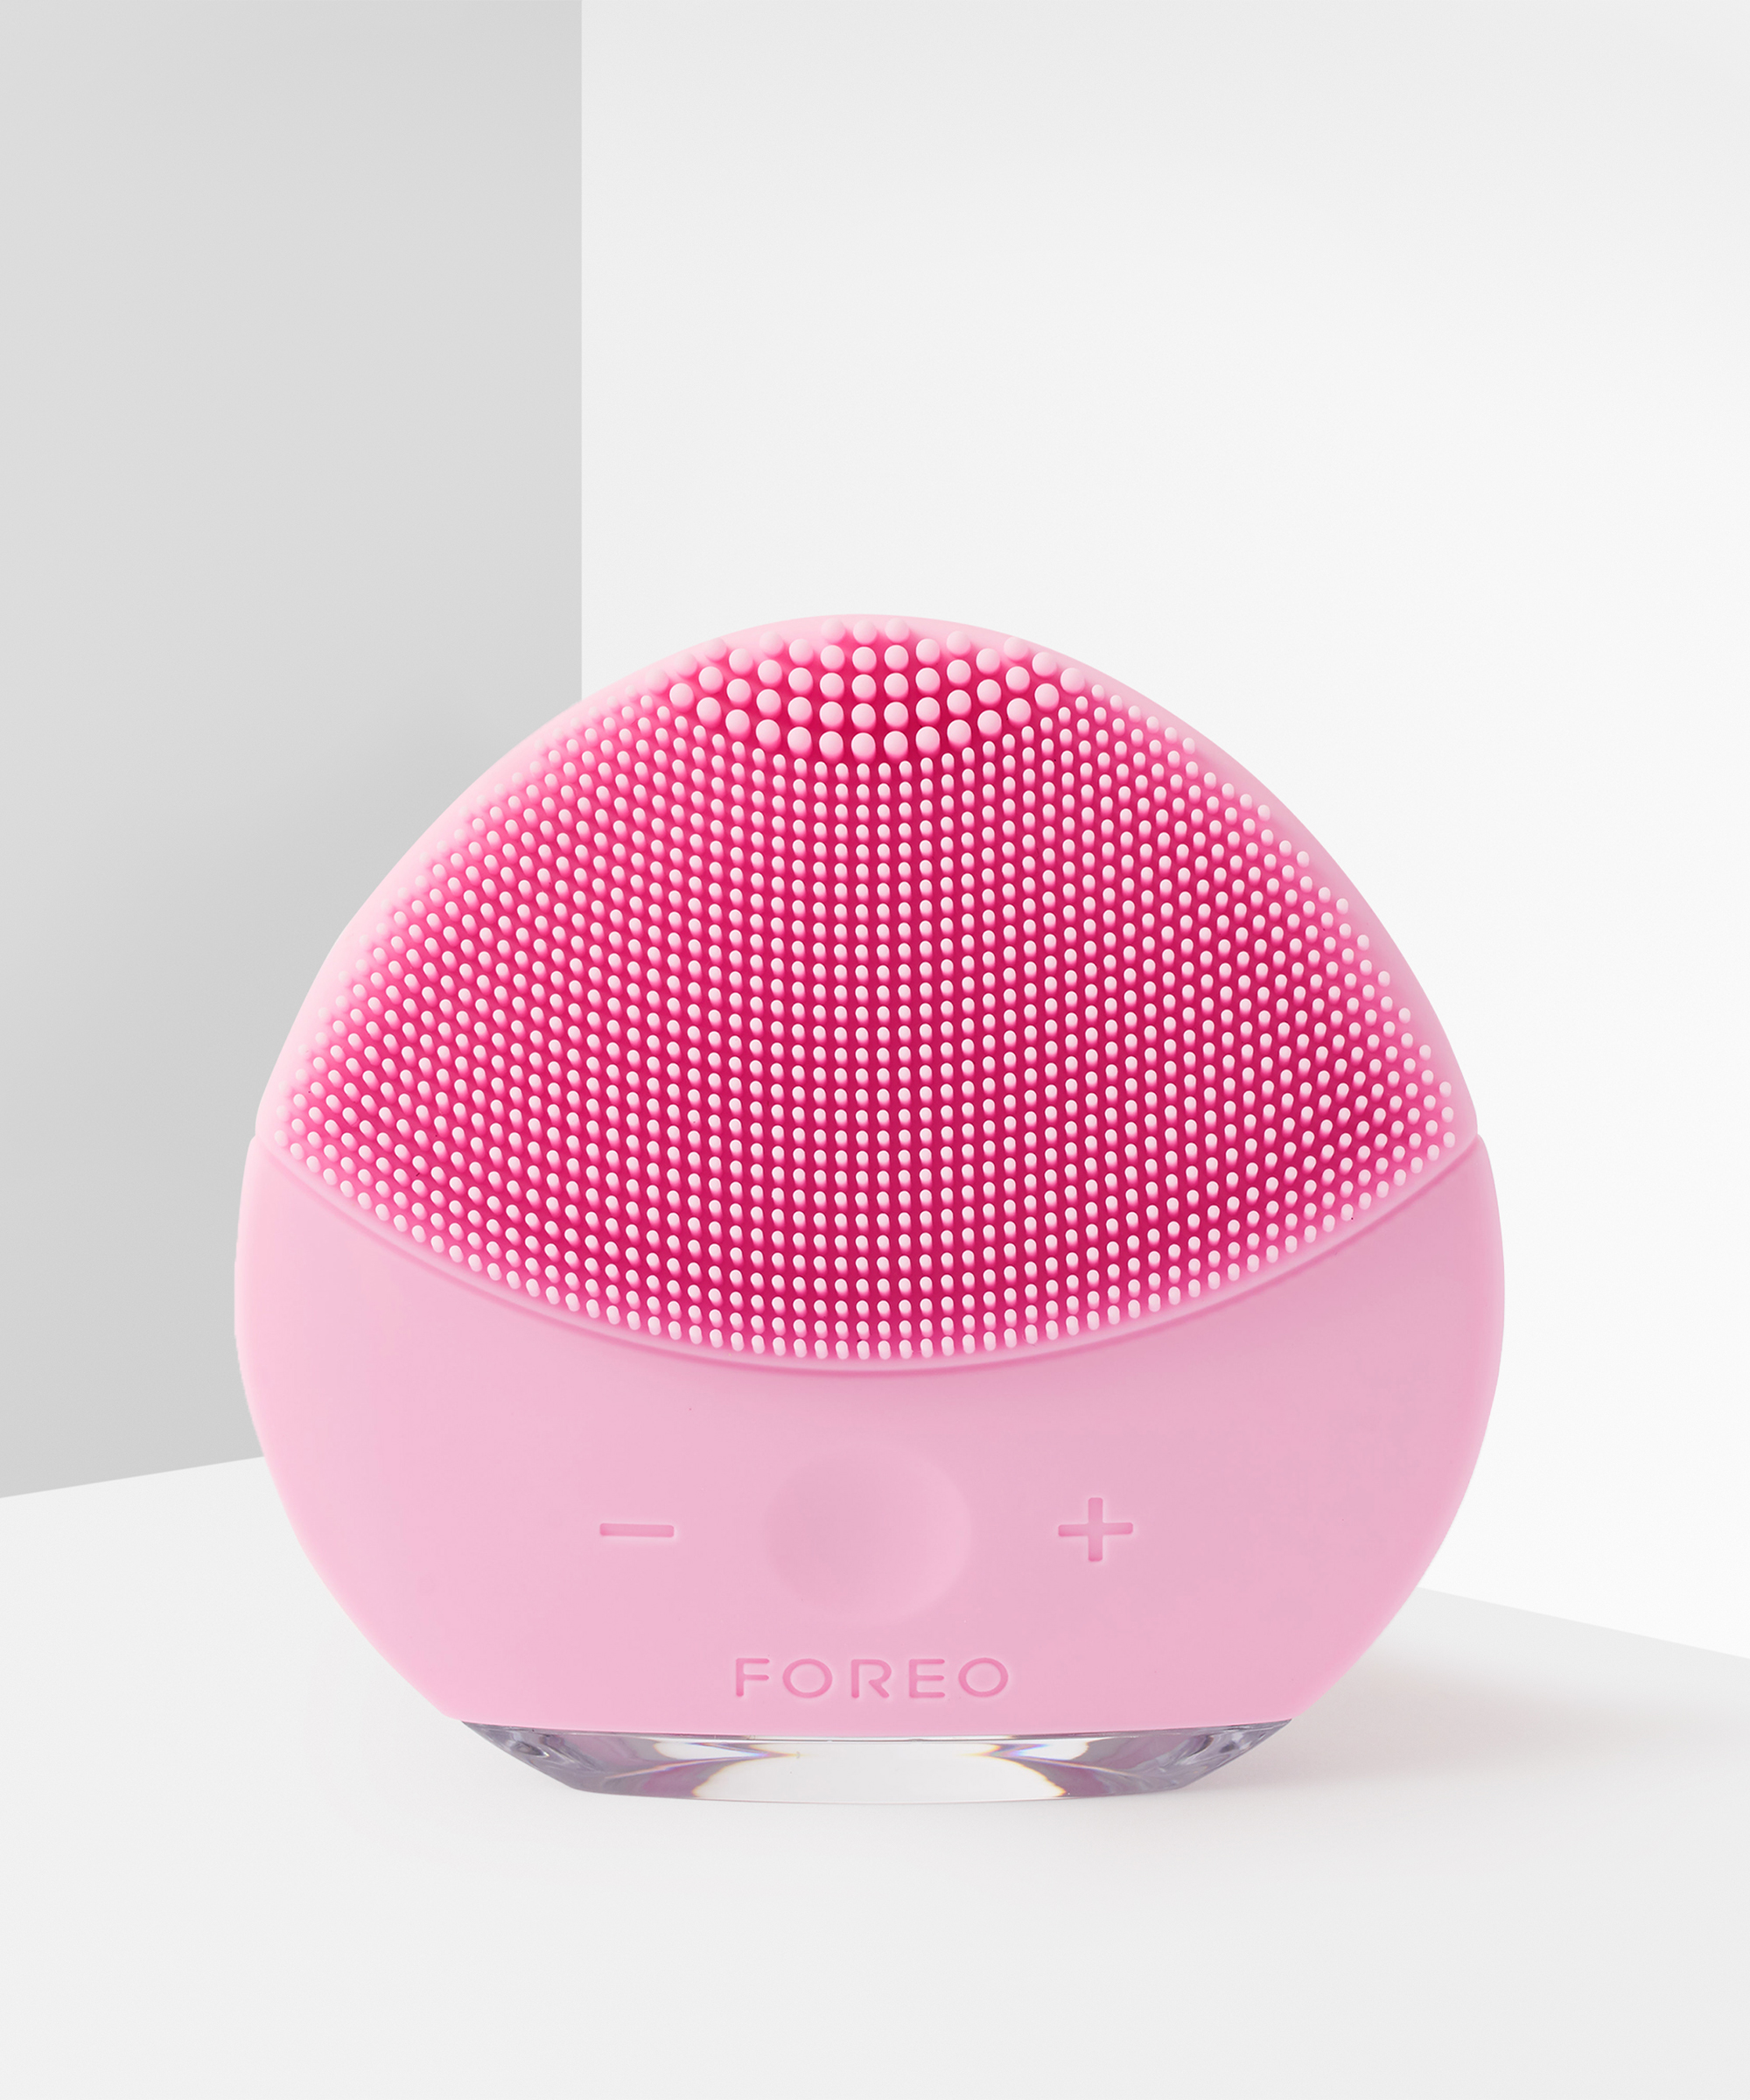 Foreo LUNA™ Mini 2 For Face BEAUTY Types at Skin Brush BAY Dual-Sided All